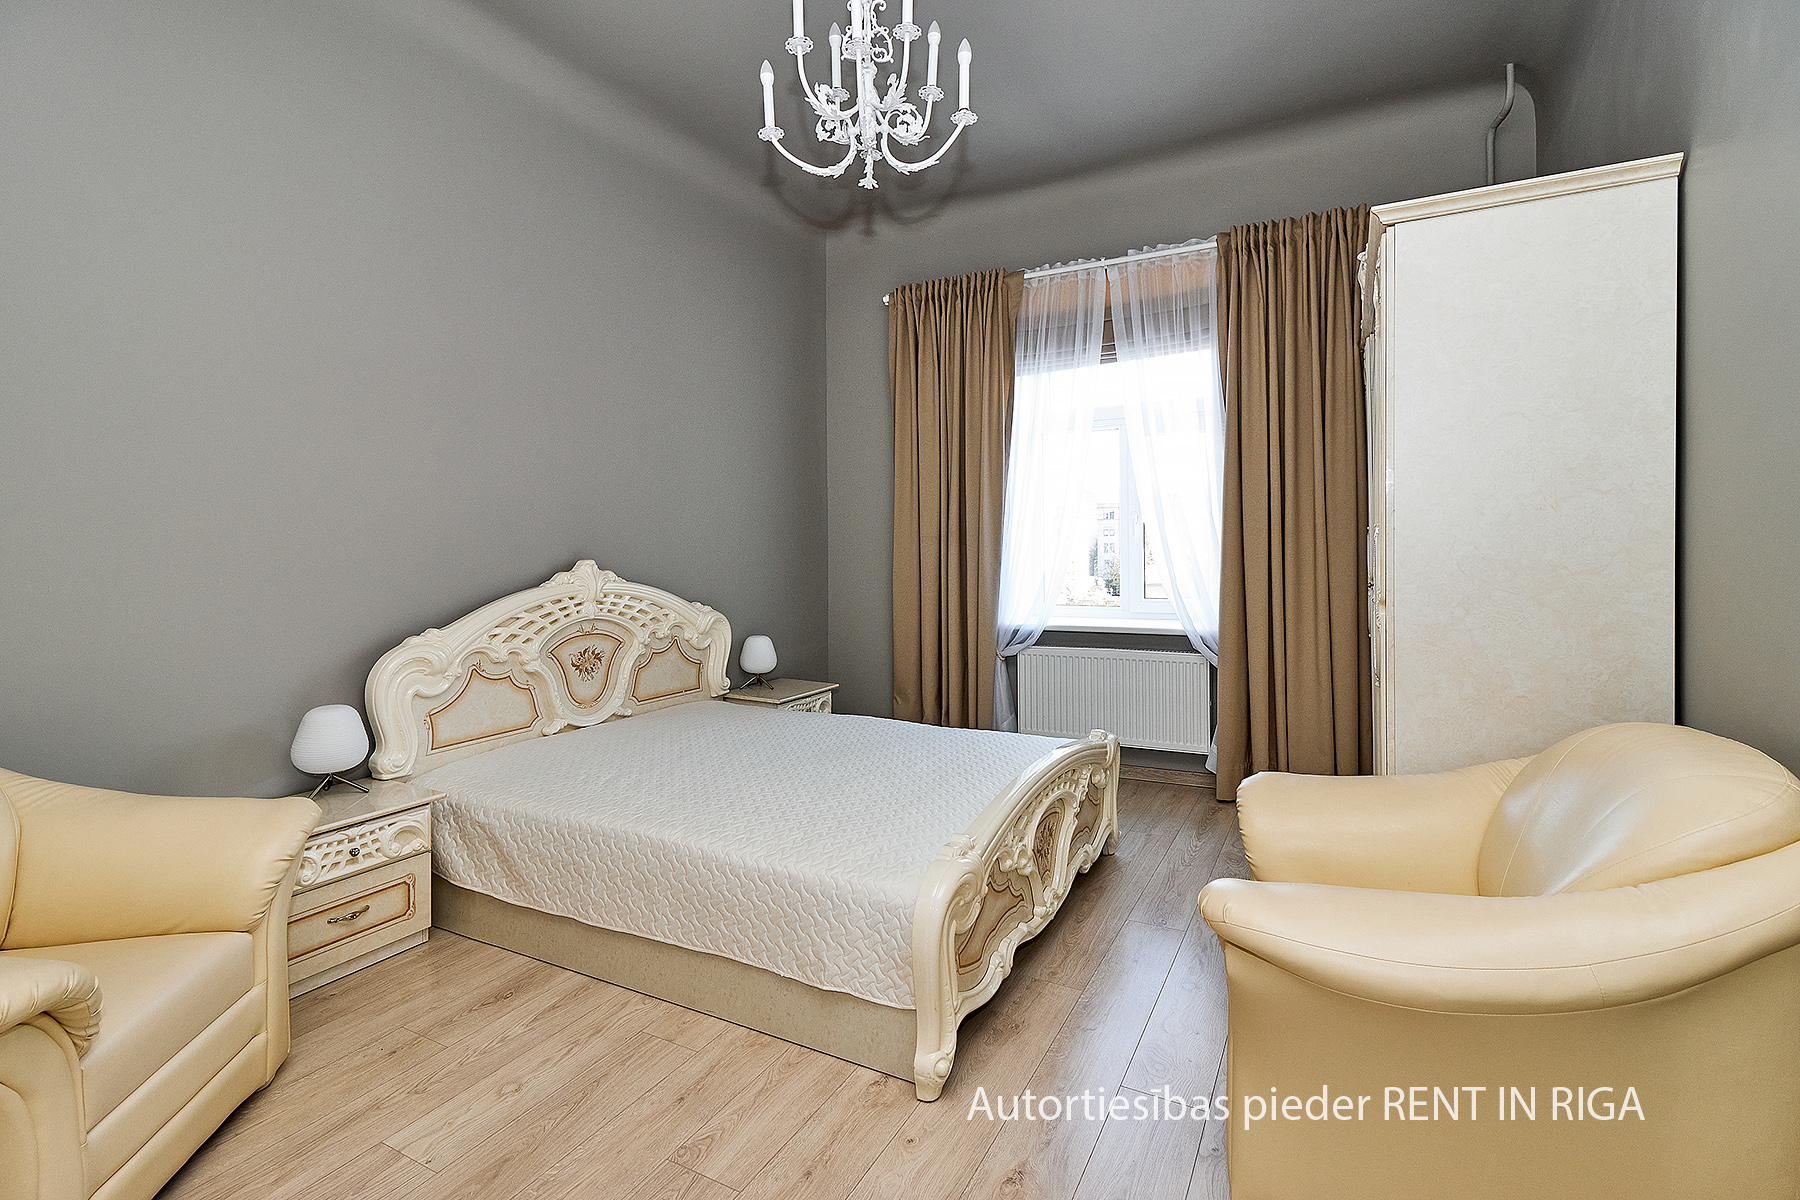 Apartment for rent, Ģertrūdes street 43 - Image 1